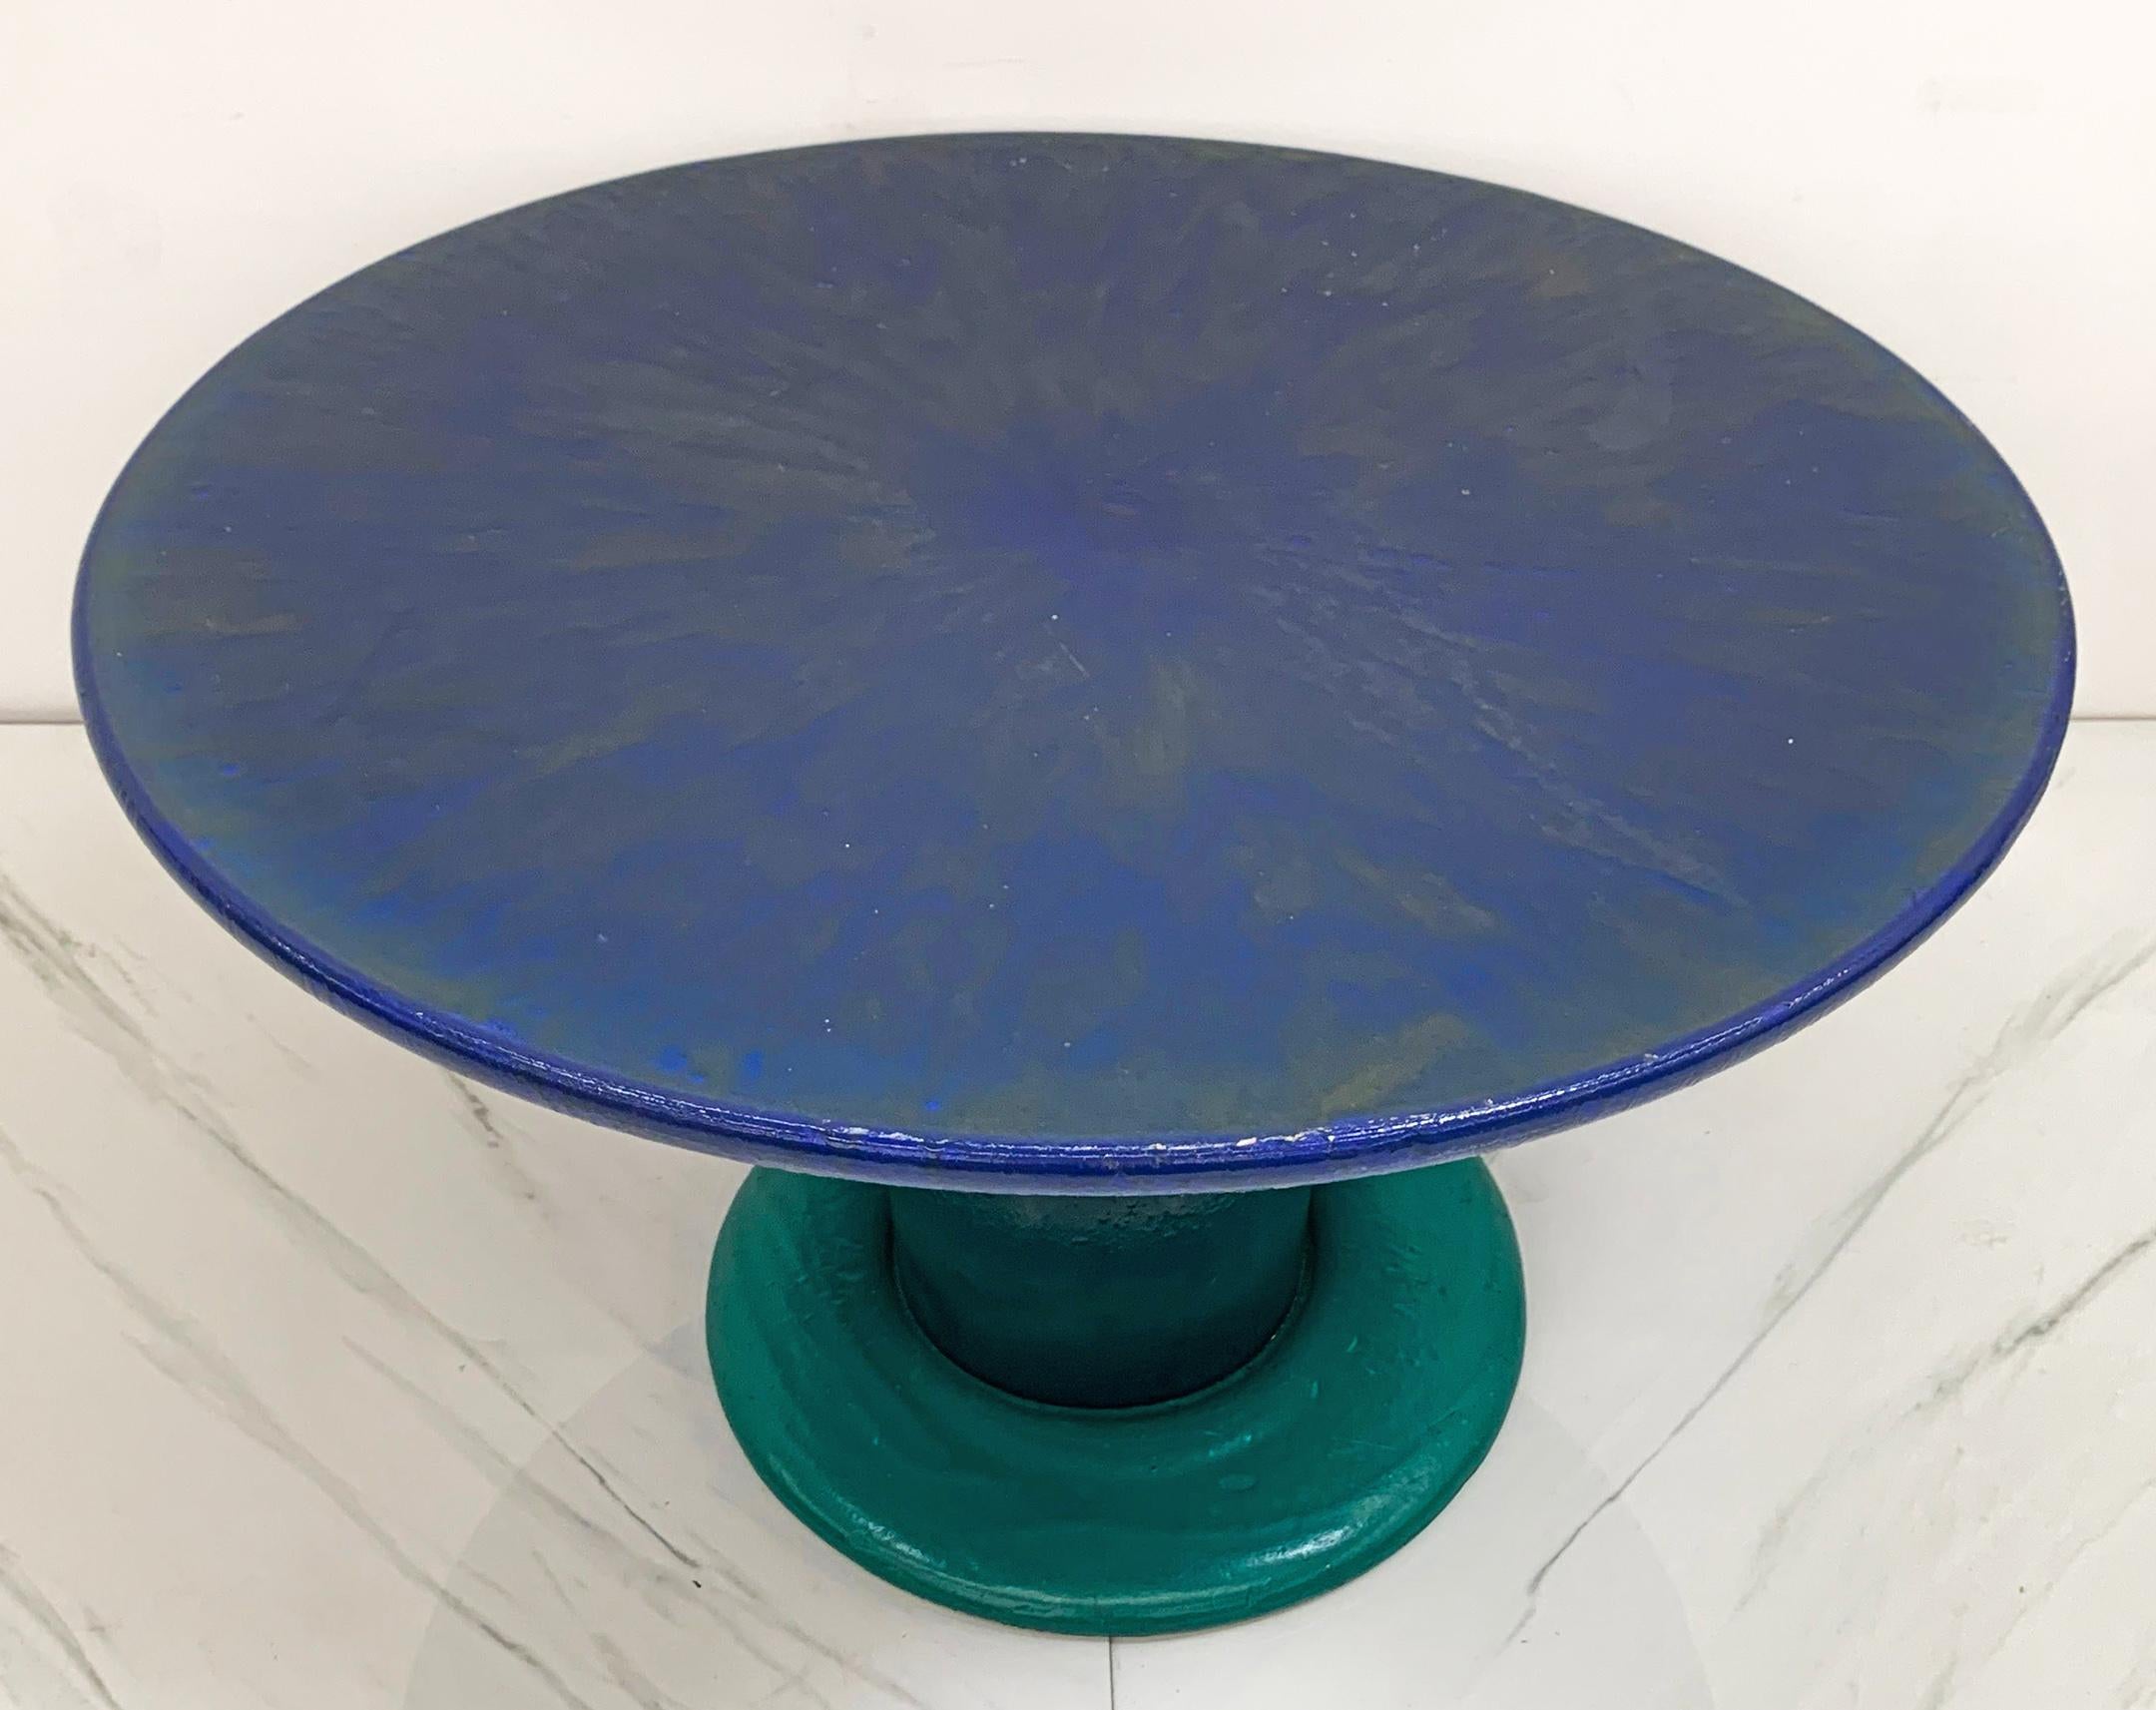 Lacquer Sunburst Mushroom Table in Green and Blue, Louis Durot, 1990's For Sale